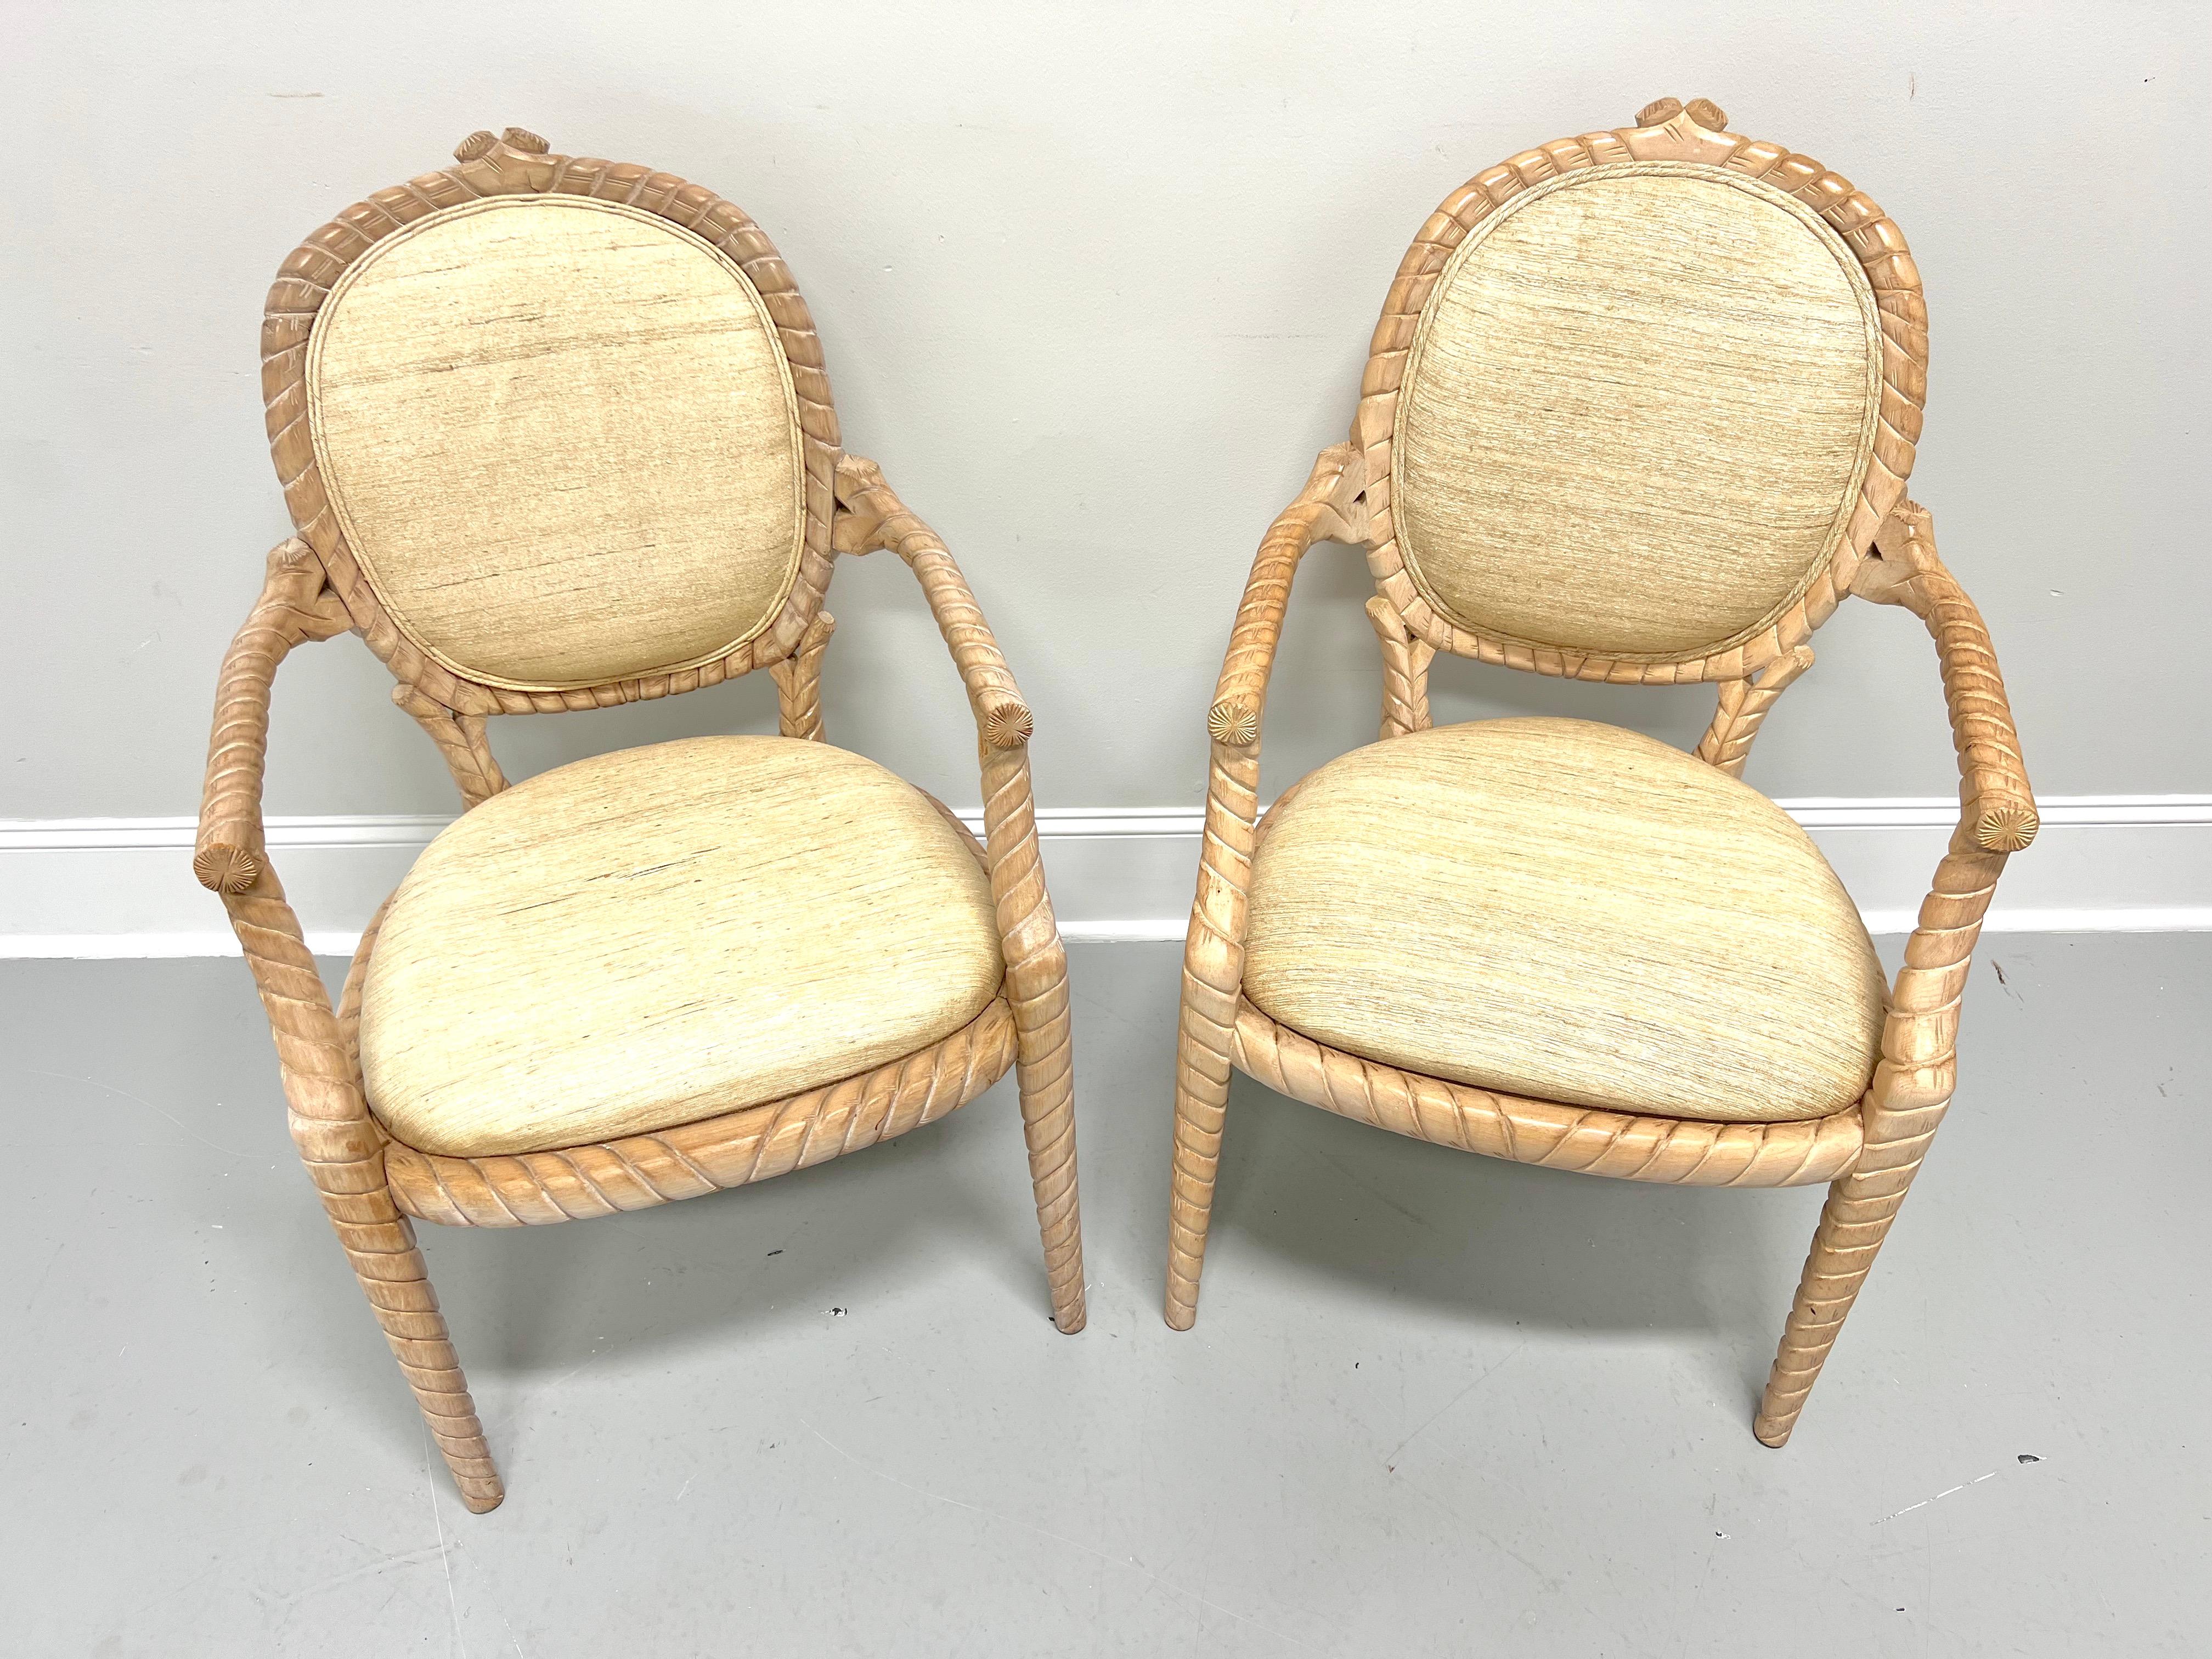 A pair of dining armchairs in the Boho Chic style, unbranded. Solid hardwood with whitewashed & distressed finish, decoratively carved rope twist to the oval shaped backrest, the curved arms, the apron, and tapered straight legs. Chair backs and